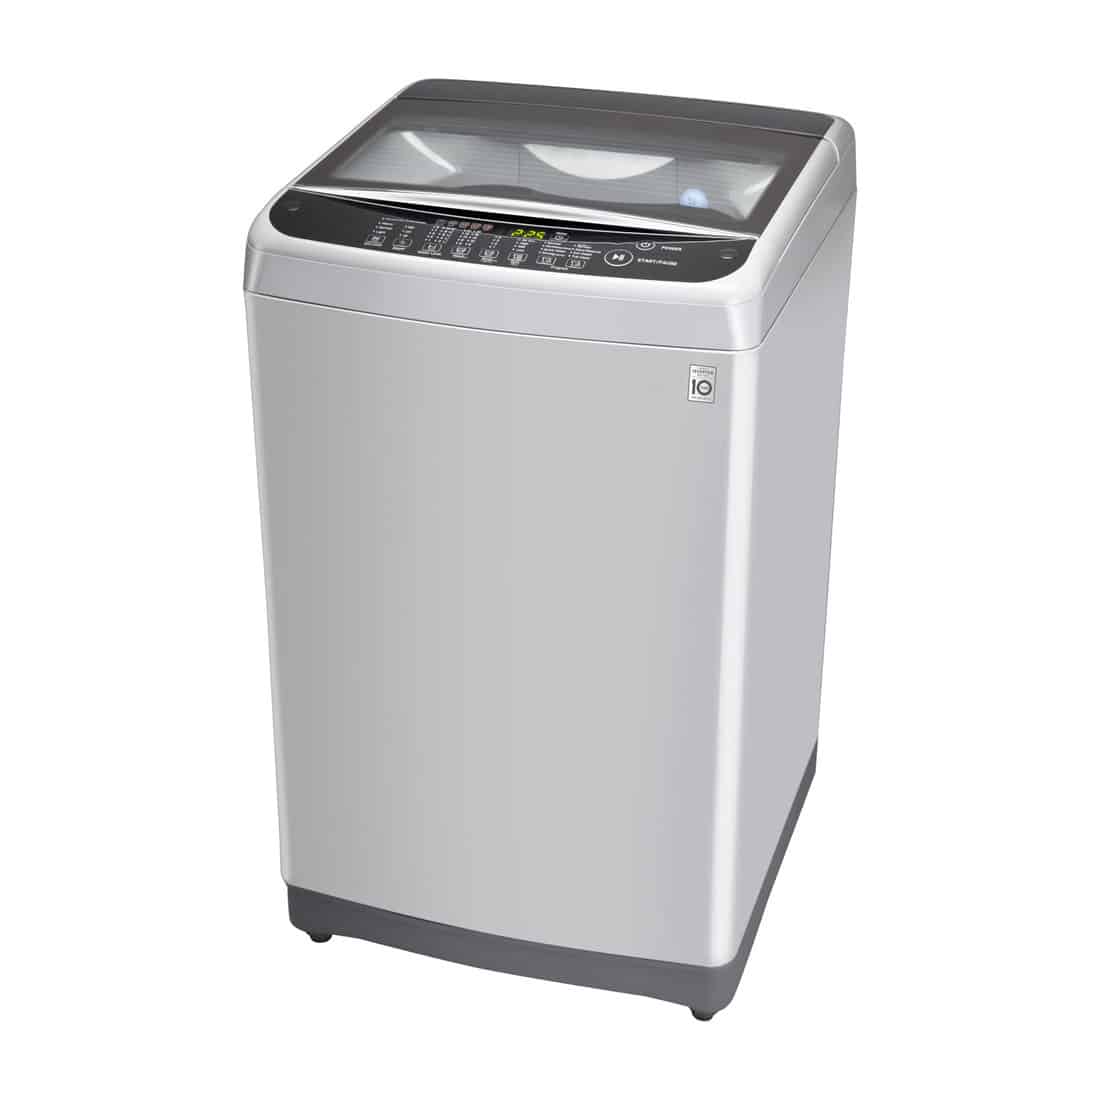 Top Load Washing Machine Isolated on White. Top Side View of Stainless Steel Fully Automatic Top Loading Washer with Integrated Control Panel. Household Domestic Appliances. Home Innovation